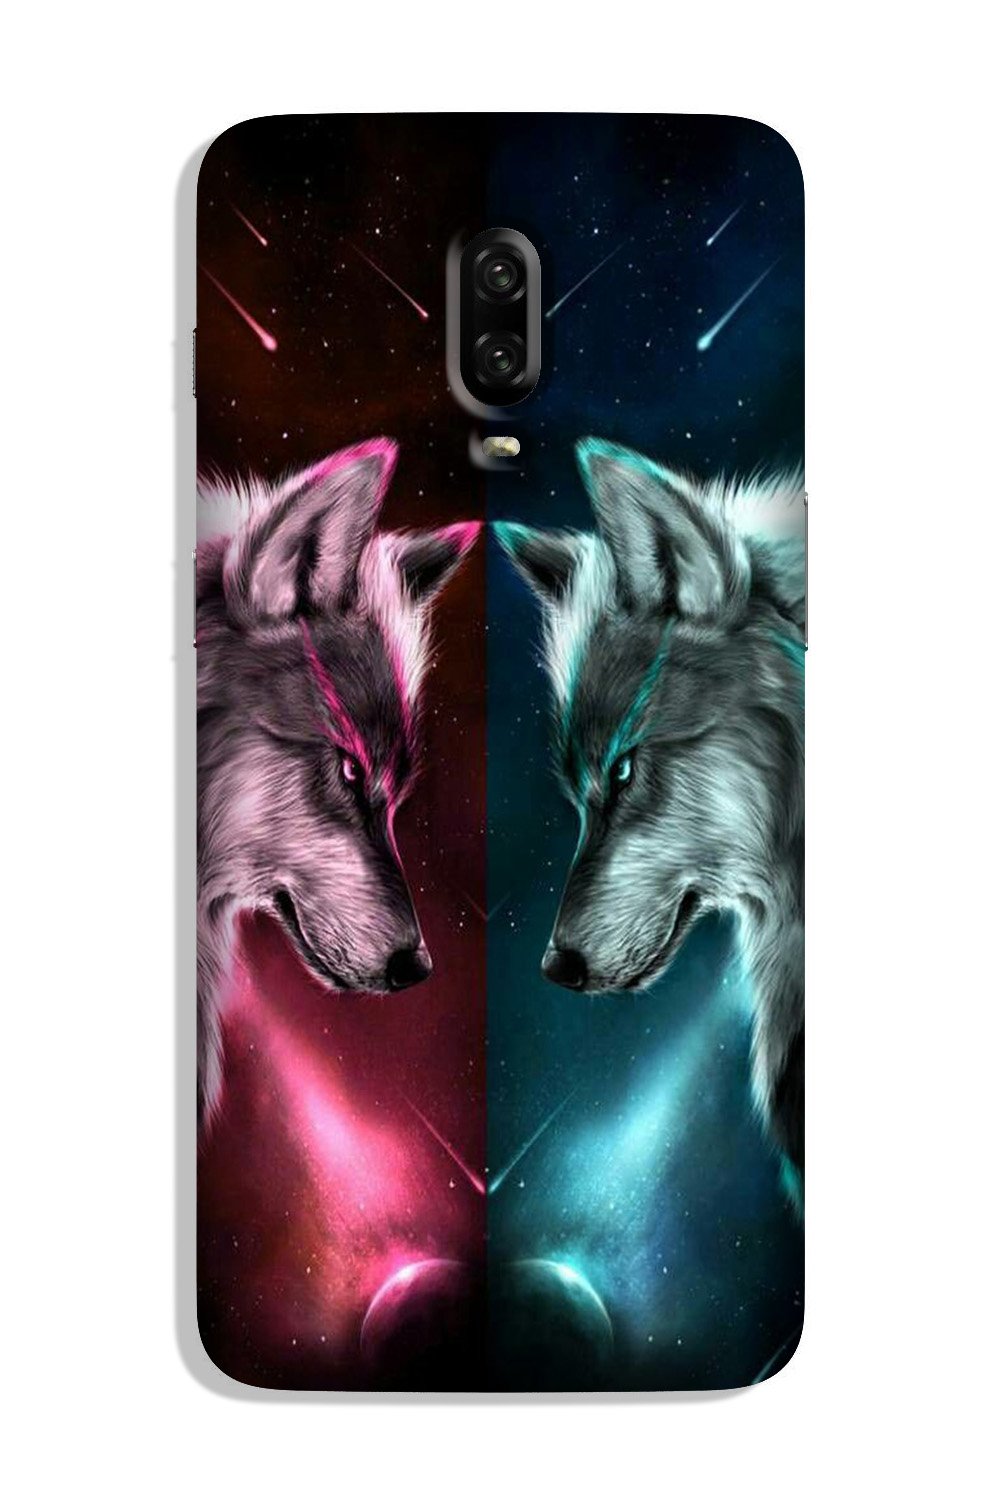 Wolf fight Case for OnePlus 7 (Design No. 221)